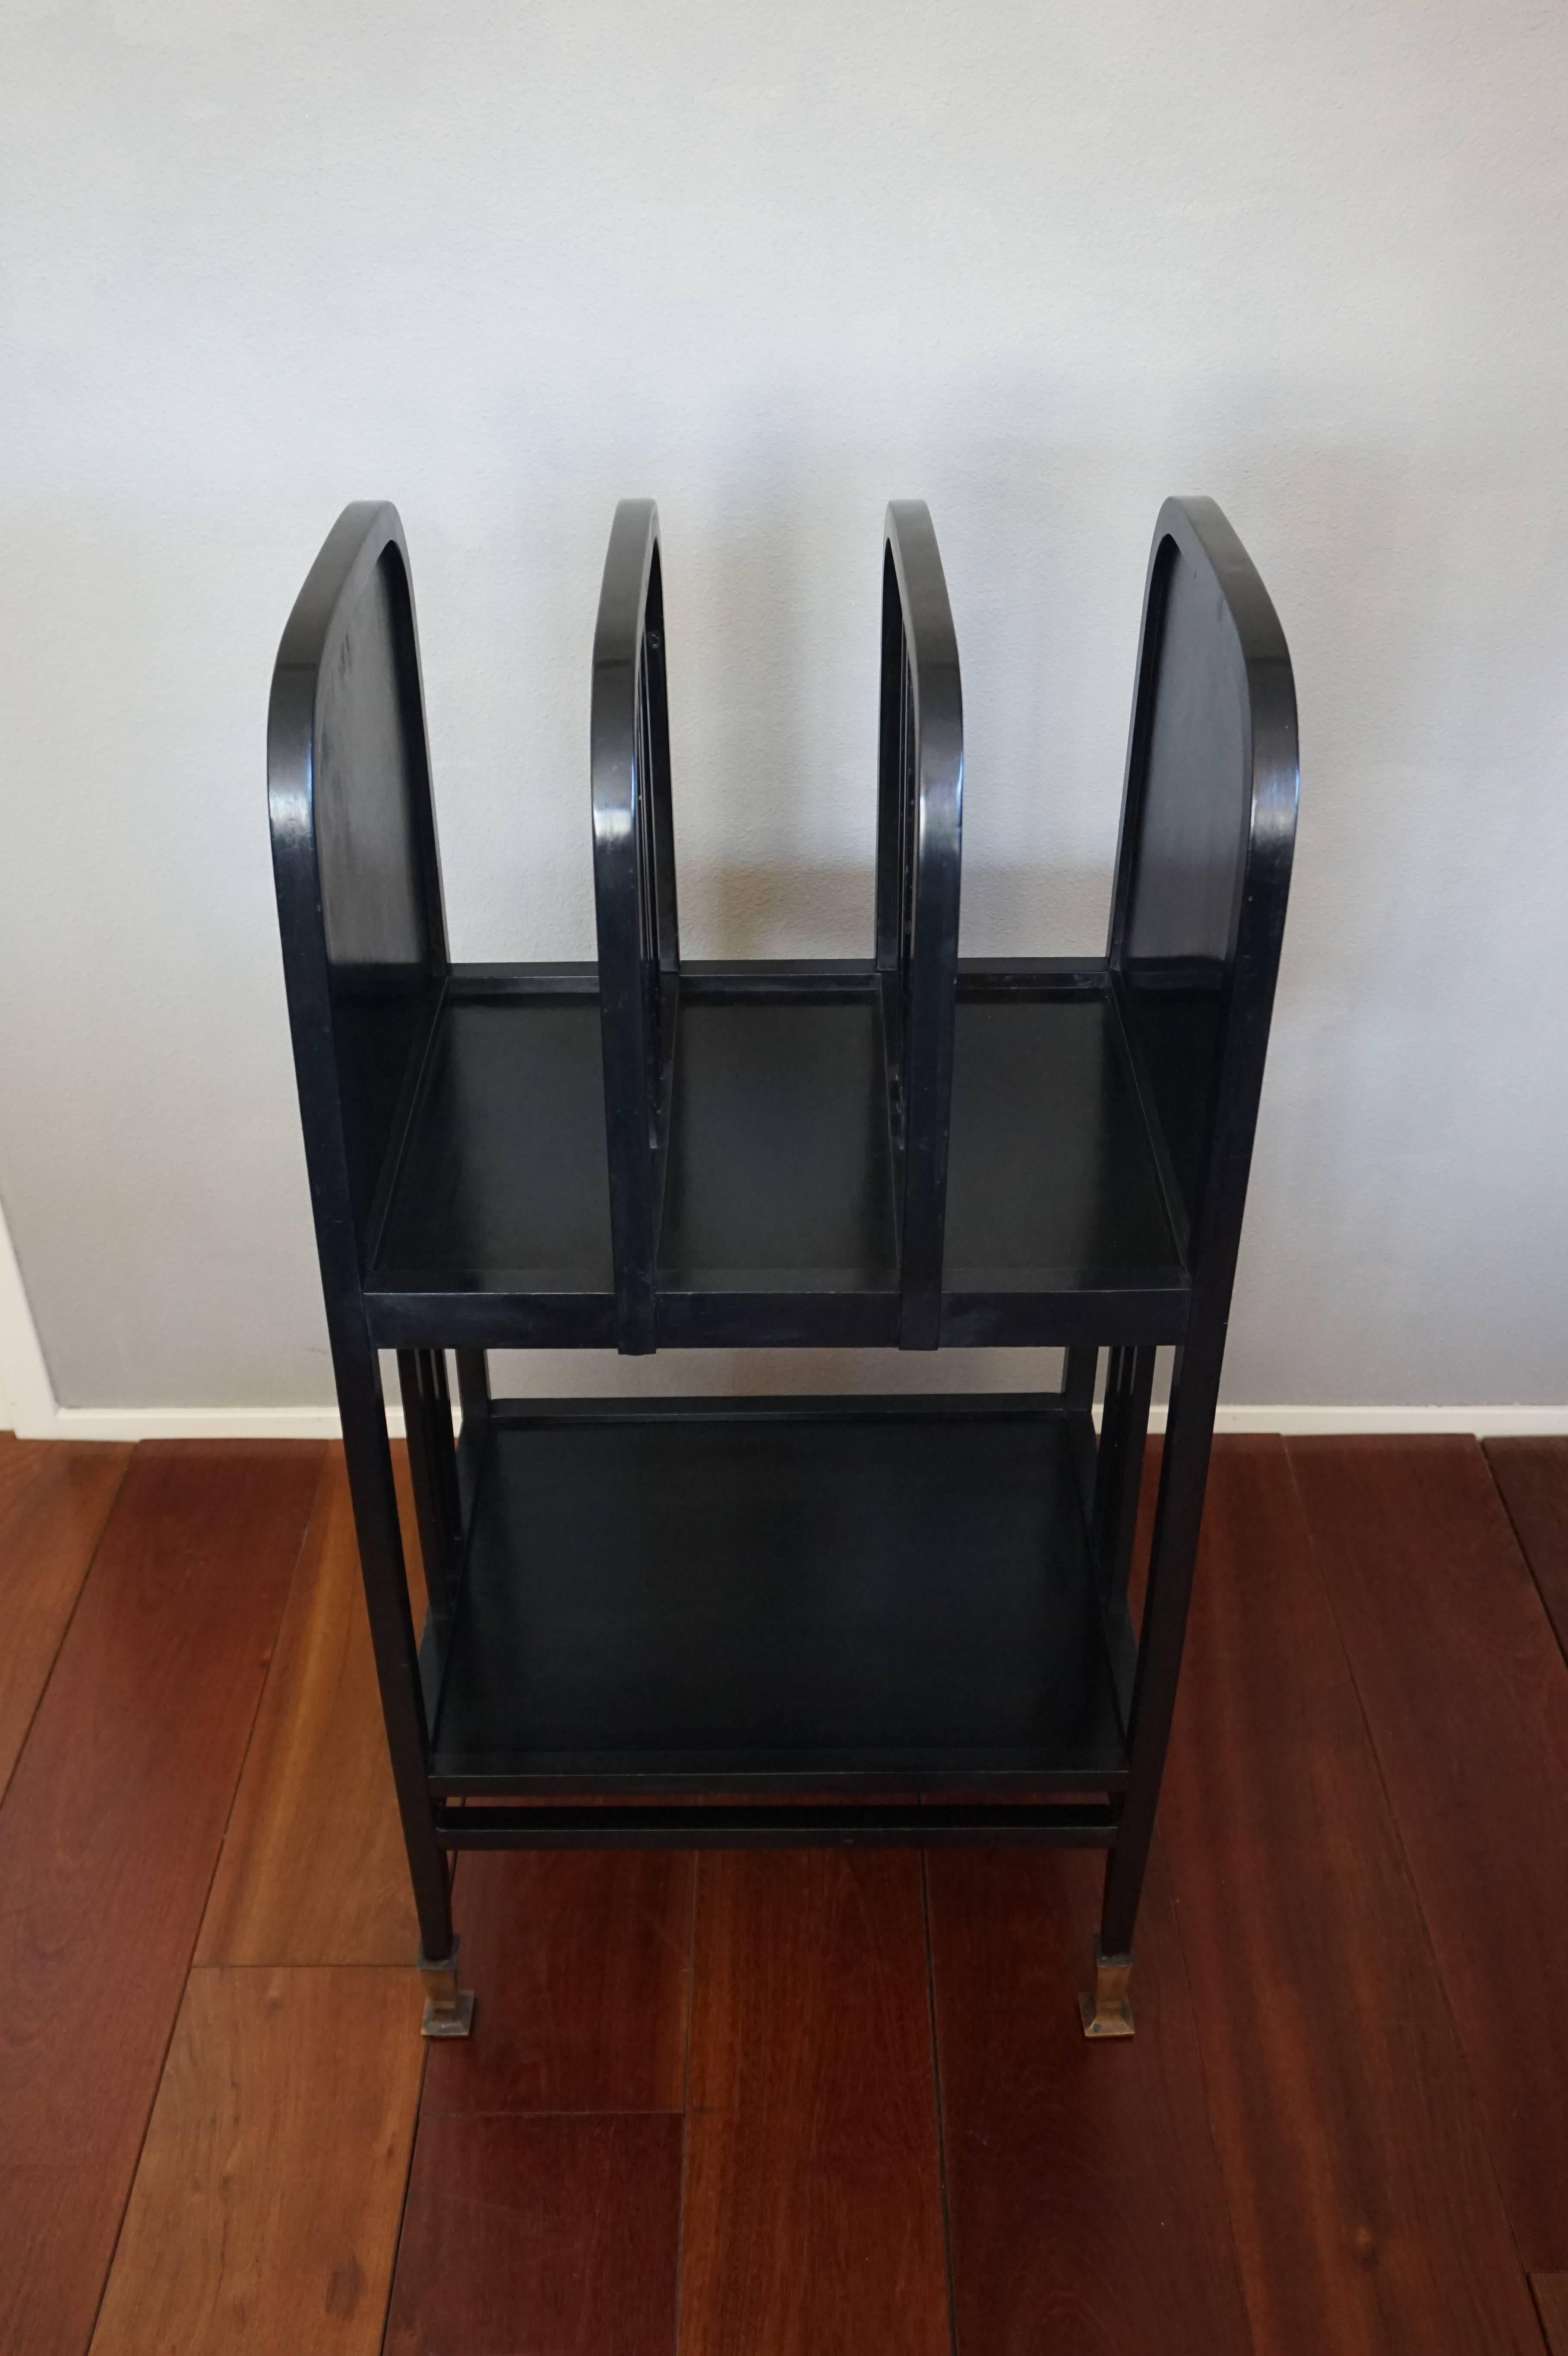 Rare modernist magazine stand.

We have never seen this model of bentwood magazine rack and we cannot find this Viennese design anywhere else in the world. There are no makers marks, but this rare piece must have been manufactured by either the